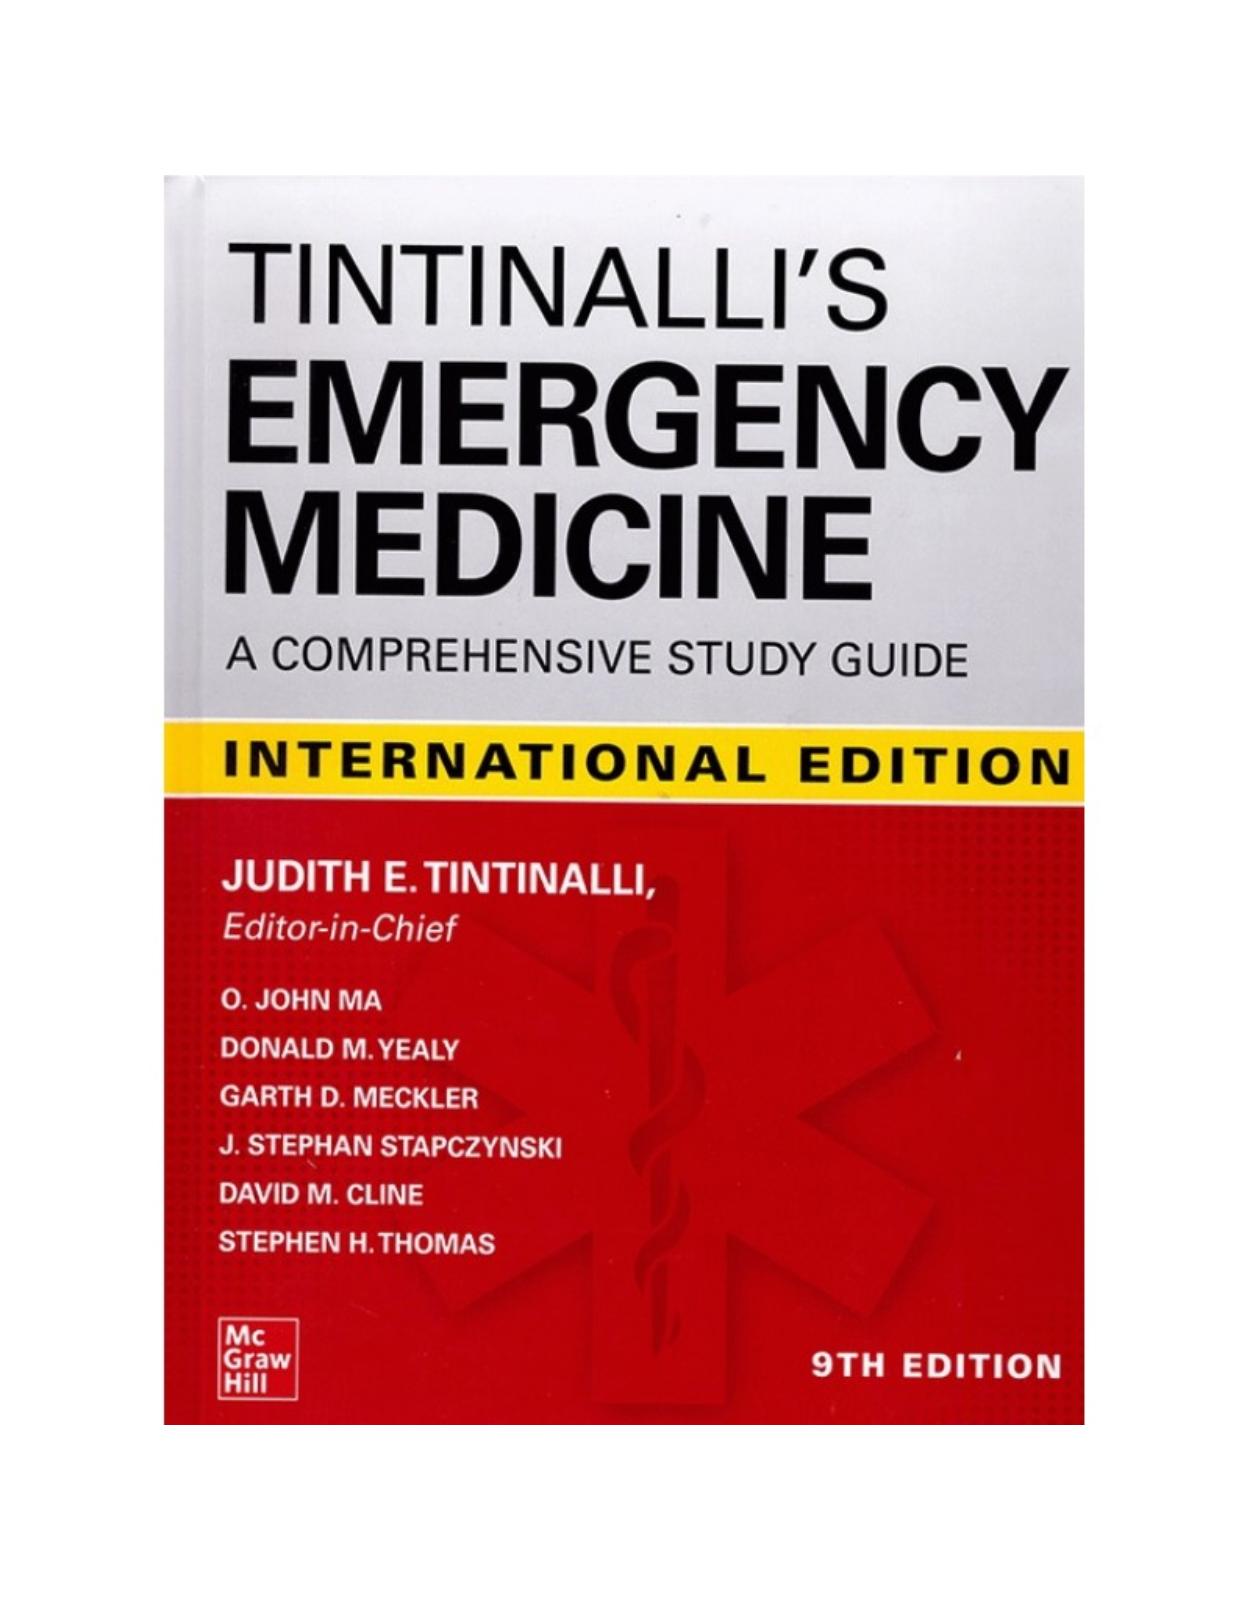 Ie Tintinalli’s Emergency Medicine: A Comprehensive Study Guide, 9th Edition